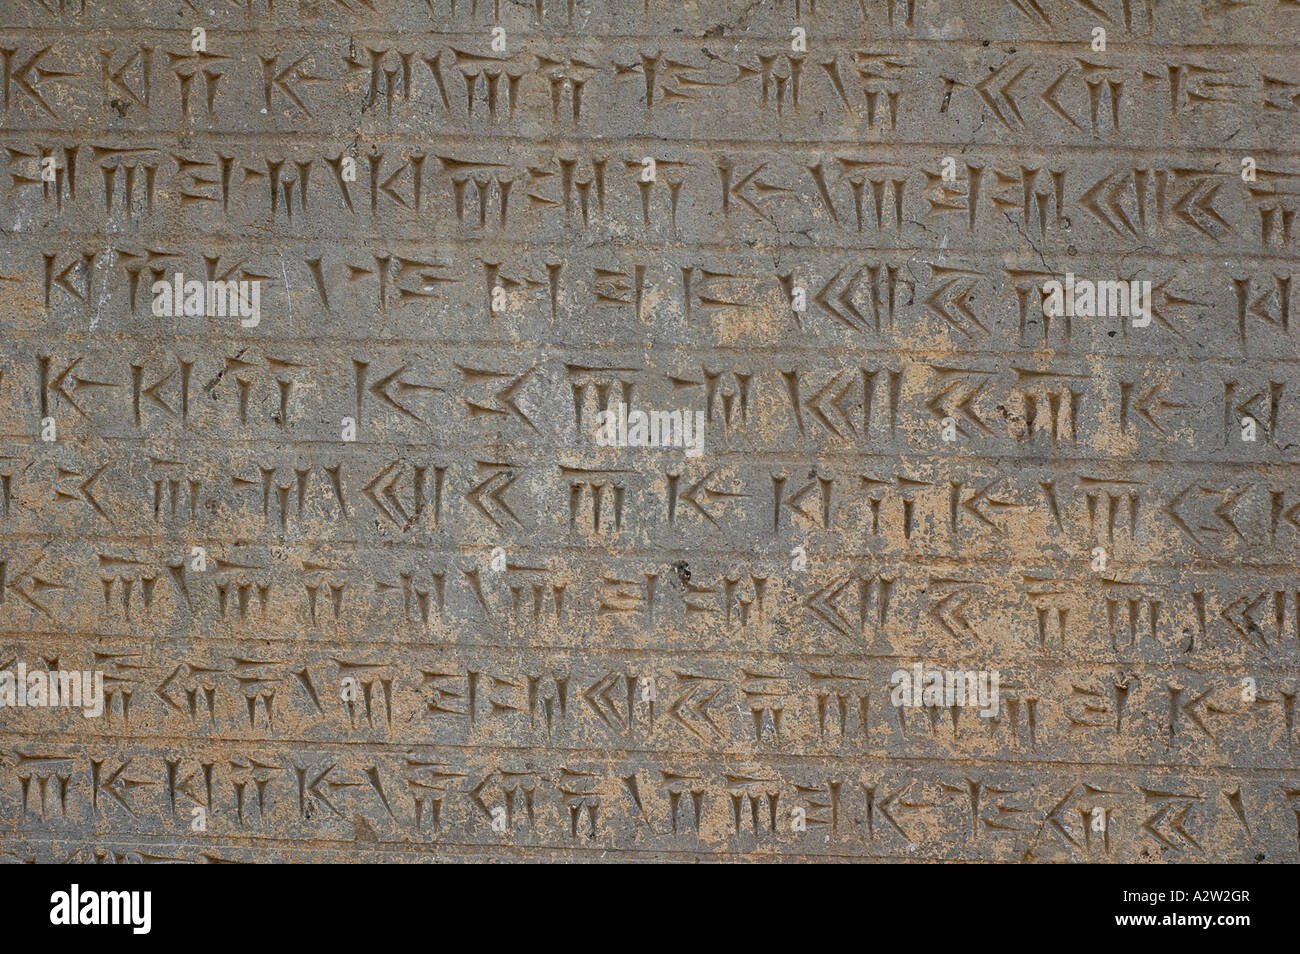 Ancient Persian script written on a piece on display in the Persepolis archeological site, near Shiraz, Iran. Stock Photo